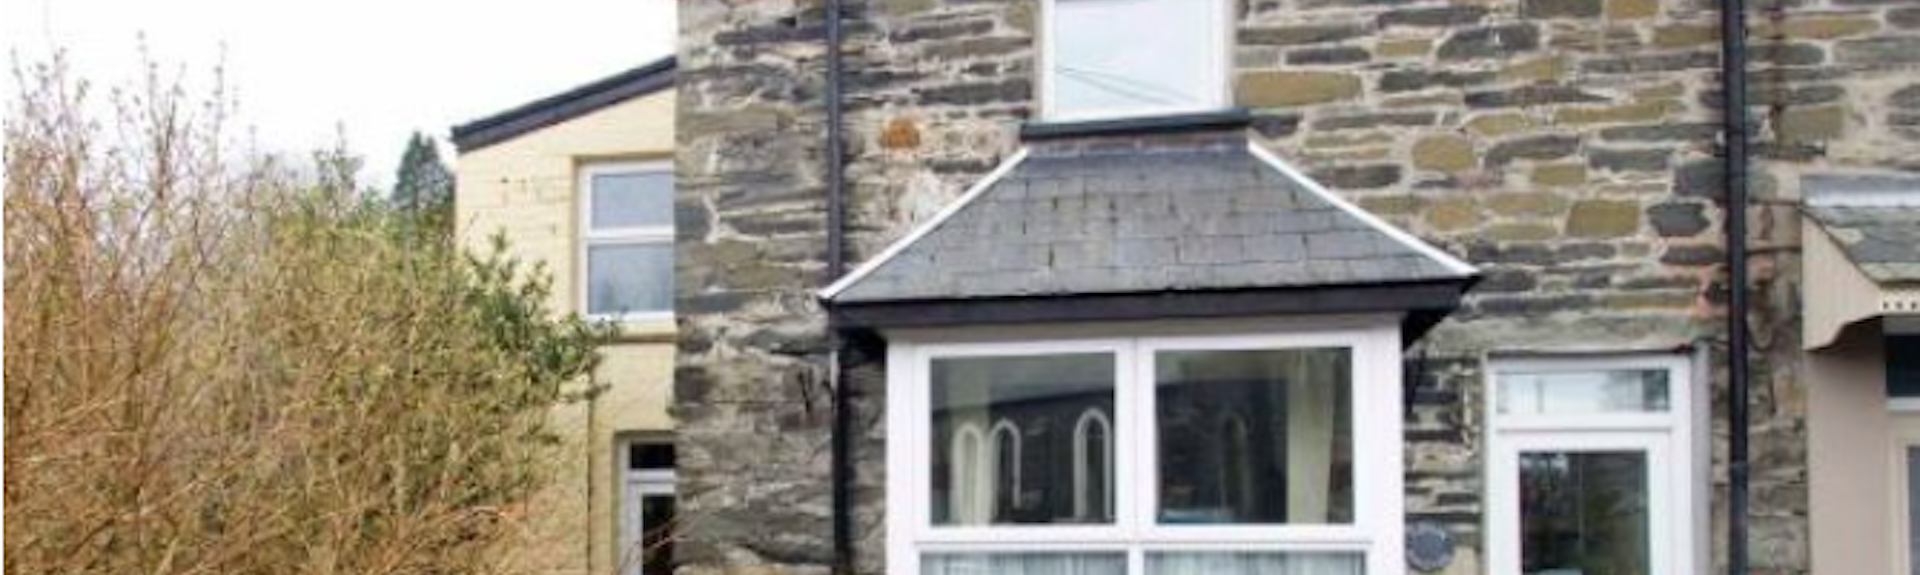 exterior of a stone-fronted holiday cottage in Snowdonia with a slate r.oofed bay window